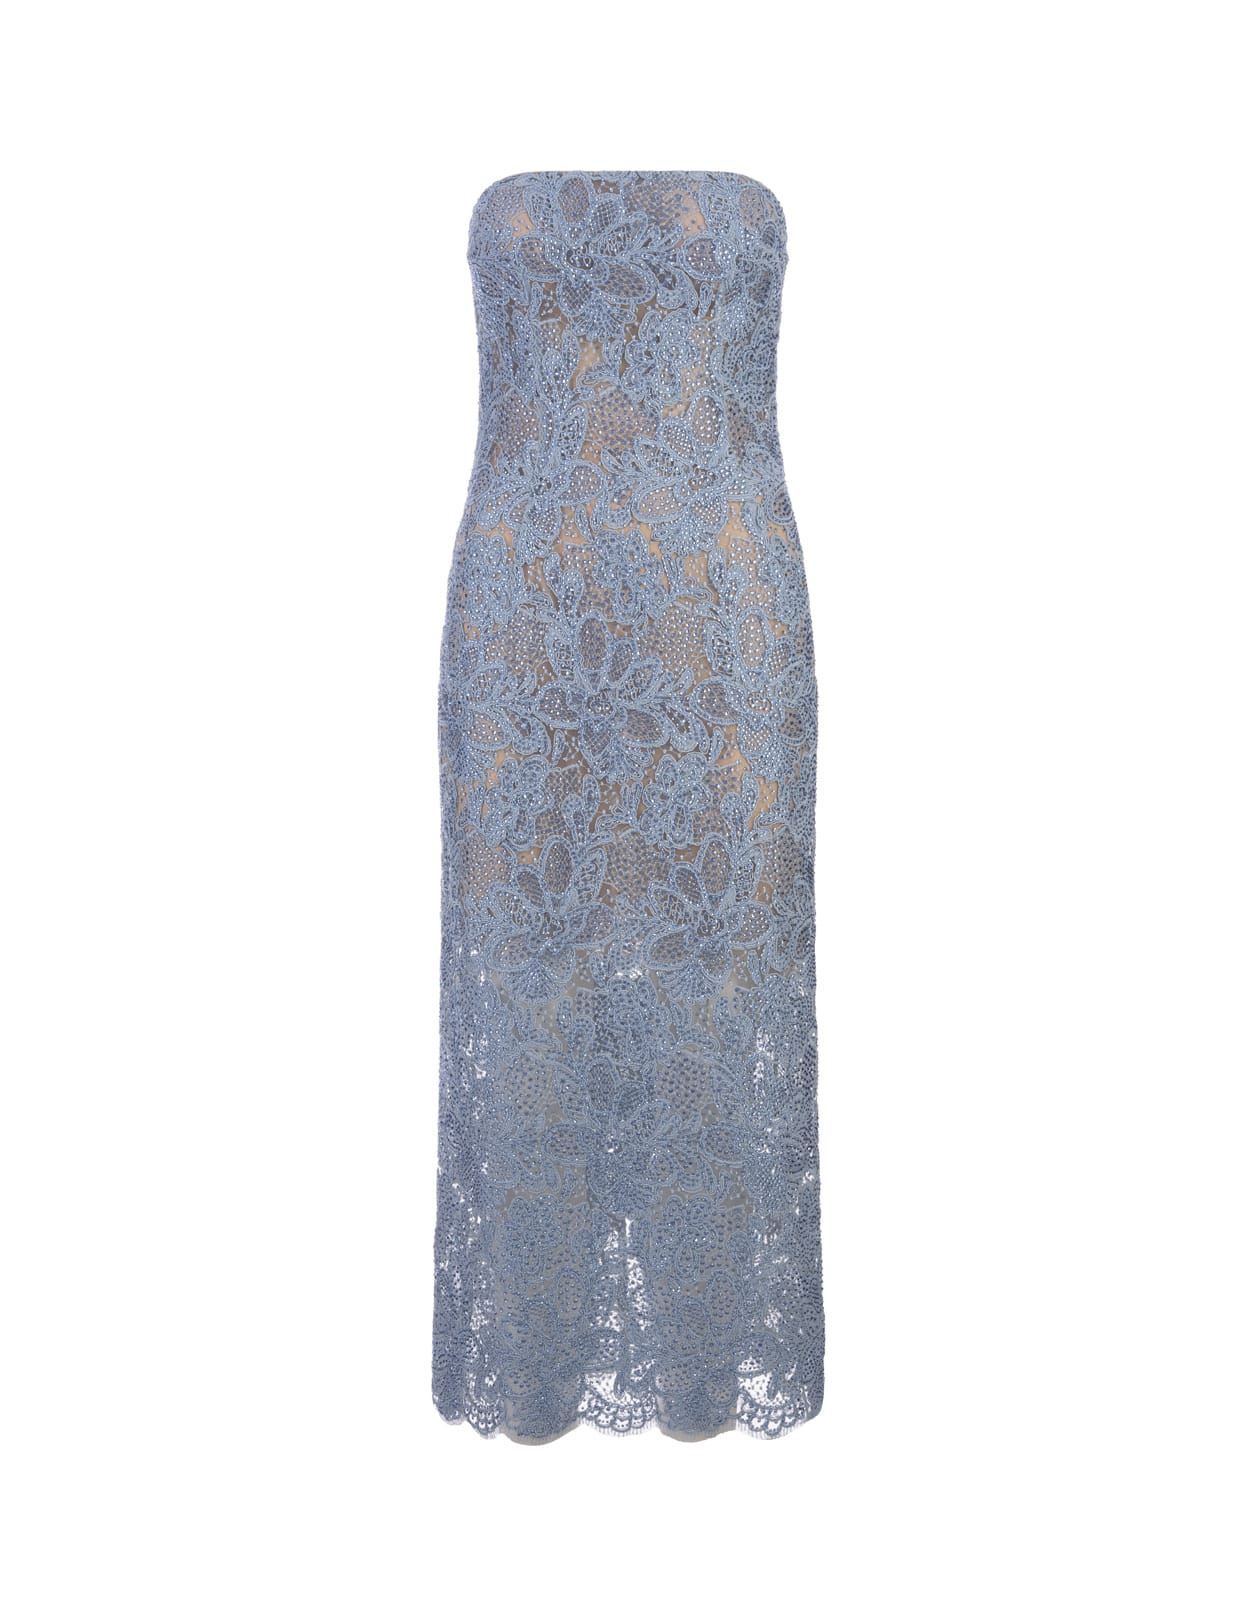 Midi Dress In Light Blue Lace With Crystals